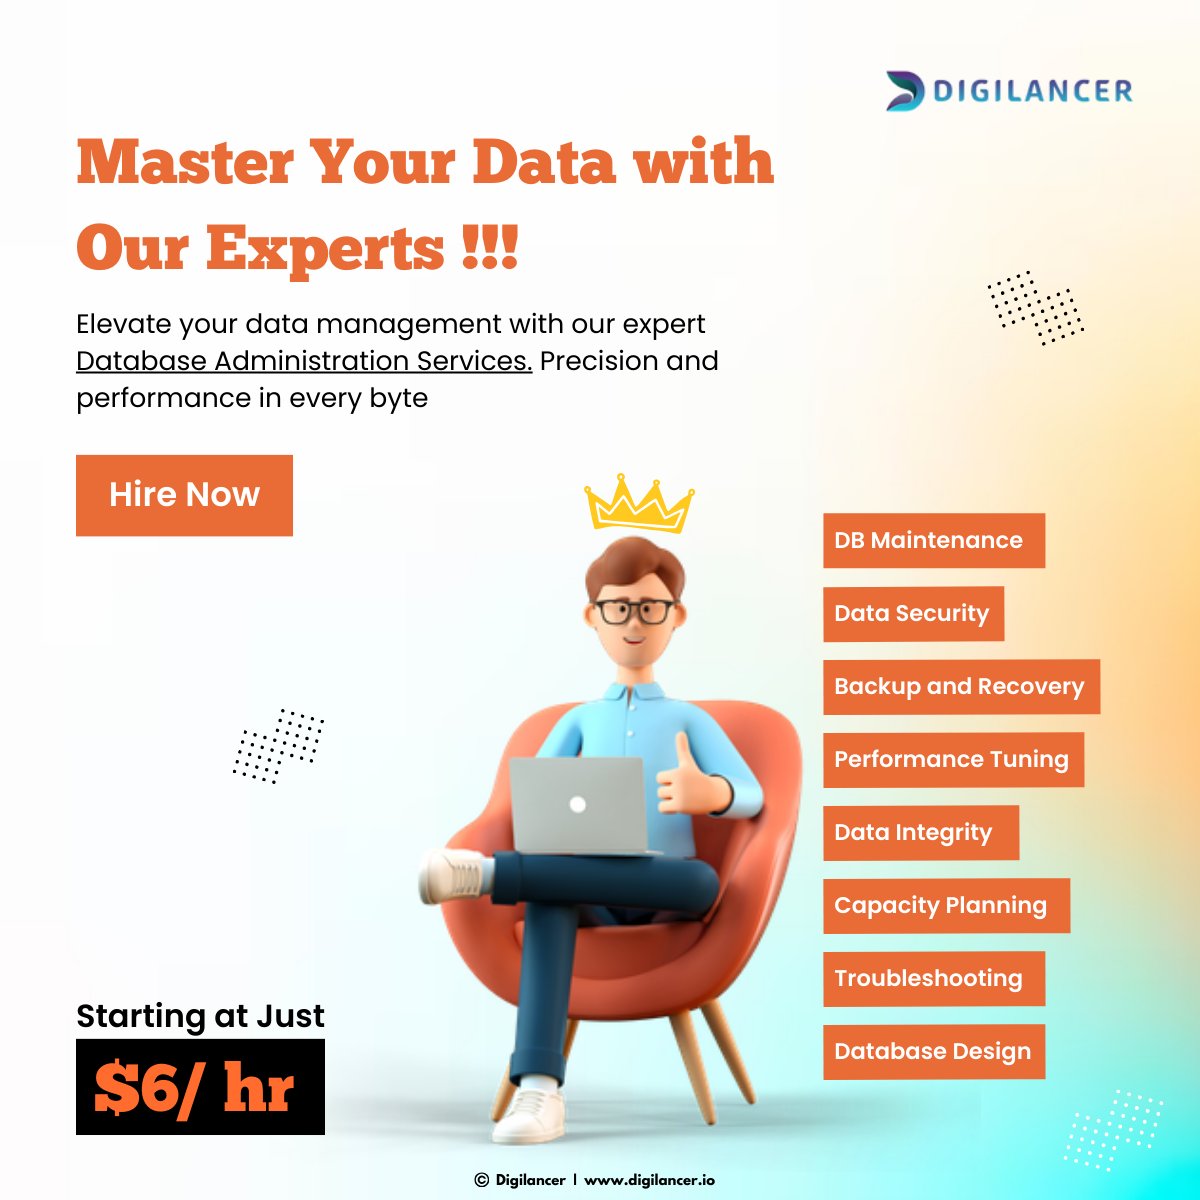 Ready to take control of your data? Join us and master your data with our team of experts.

Link: digilancer.io

#DataMastery #DataExperts #DataAnalytics #DataManagement #UnlockInsights #MakeInformedDecisions #DataSecurity #MasterYourData